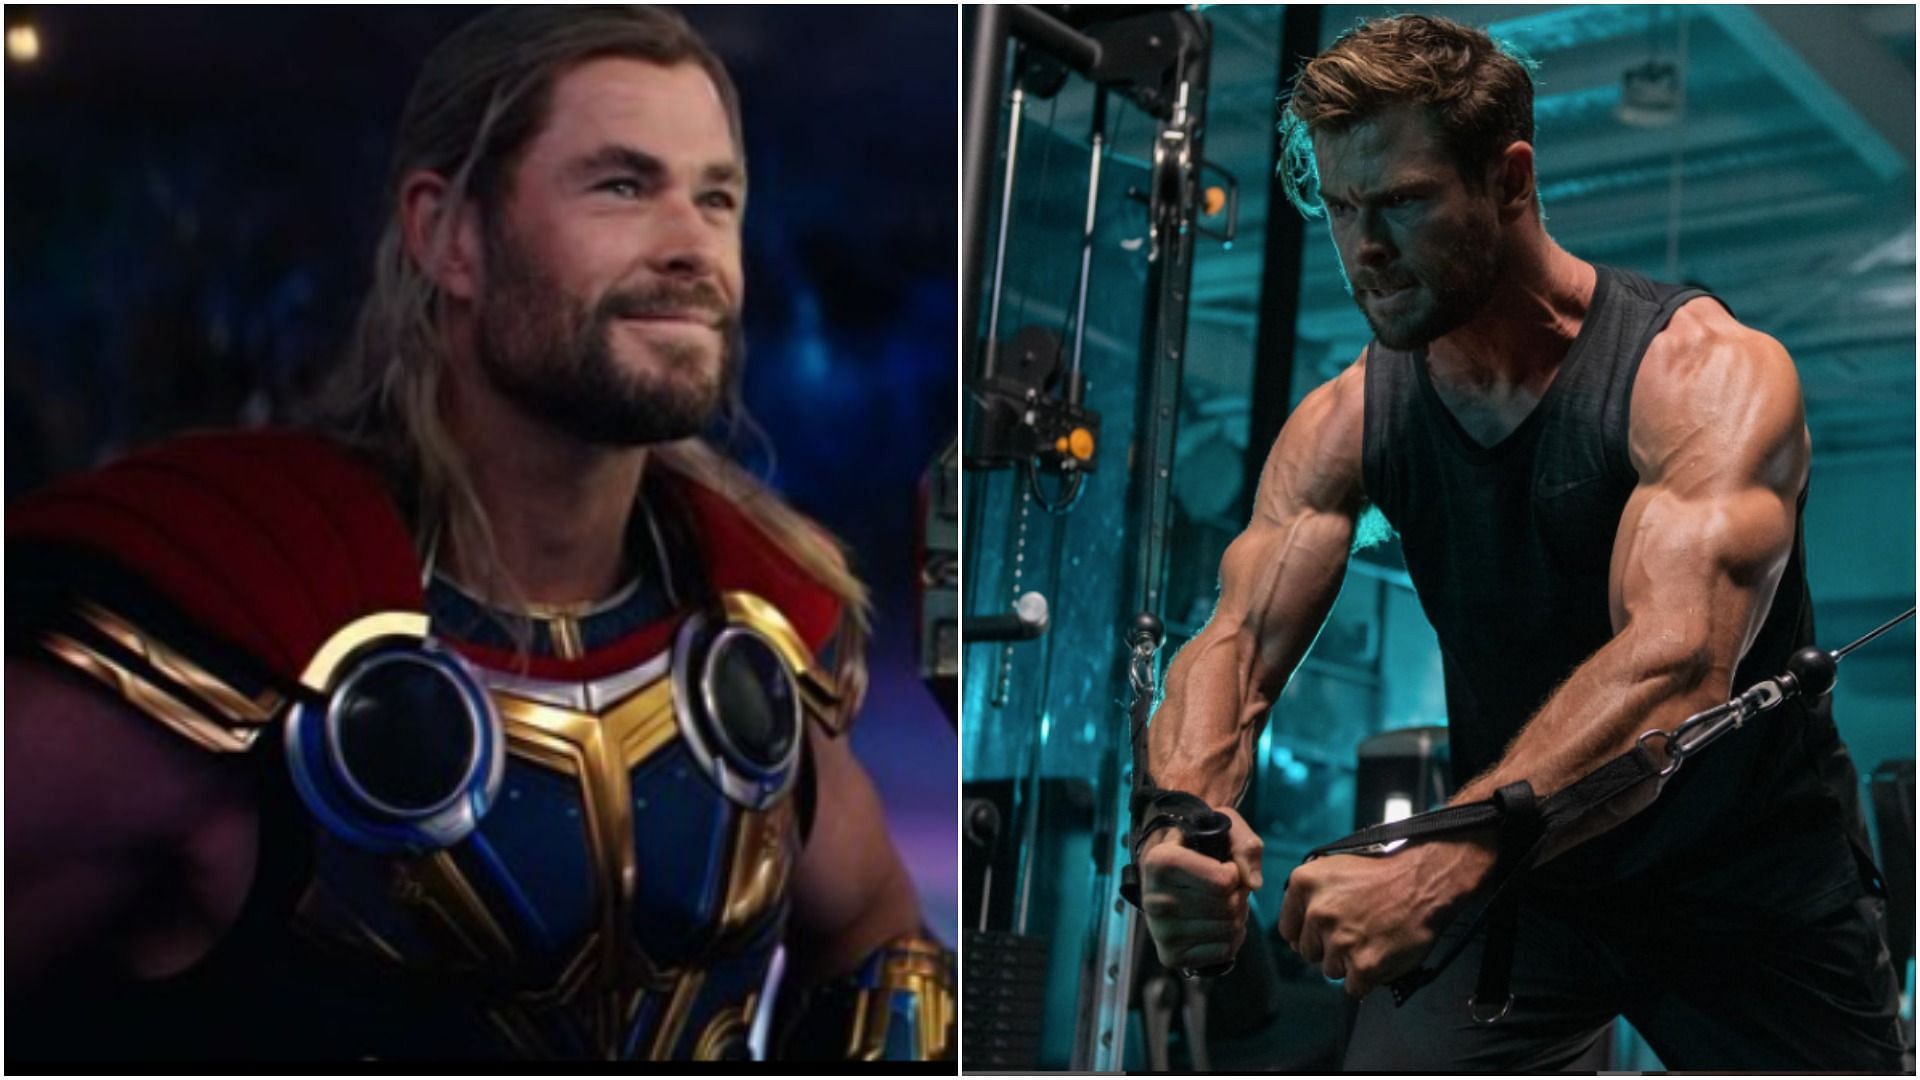 All about Chris Hemsworth